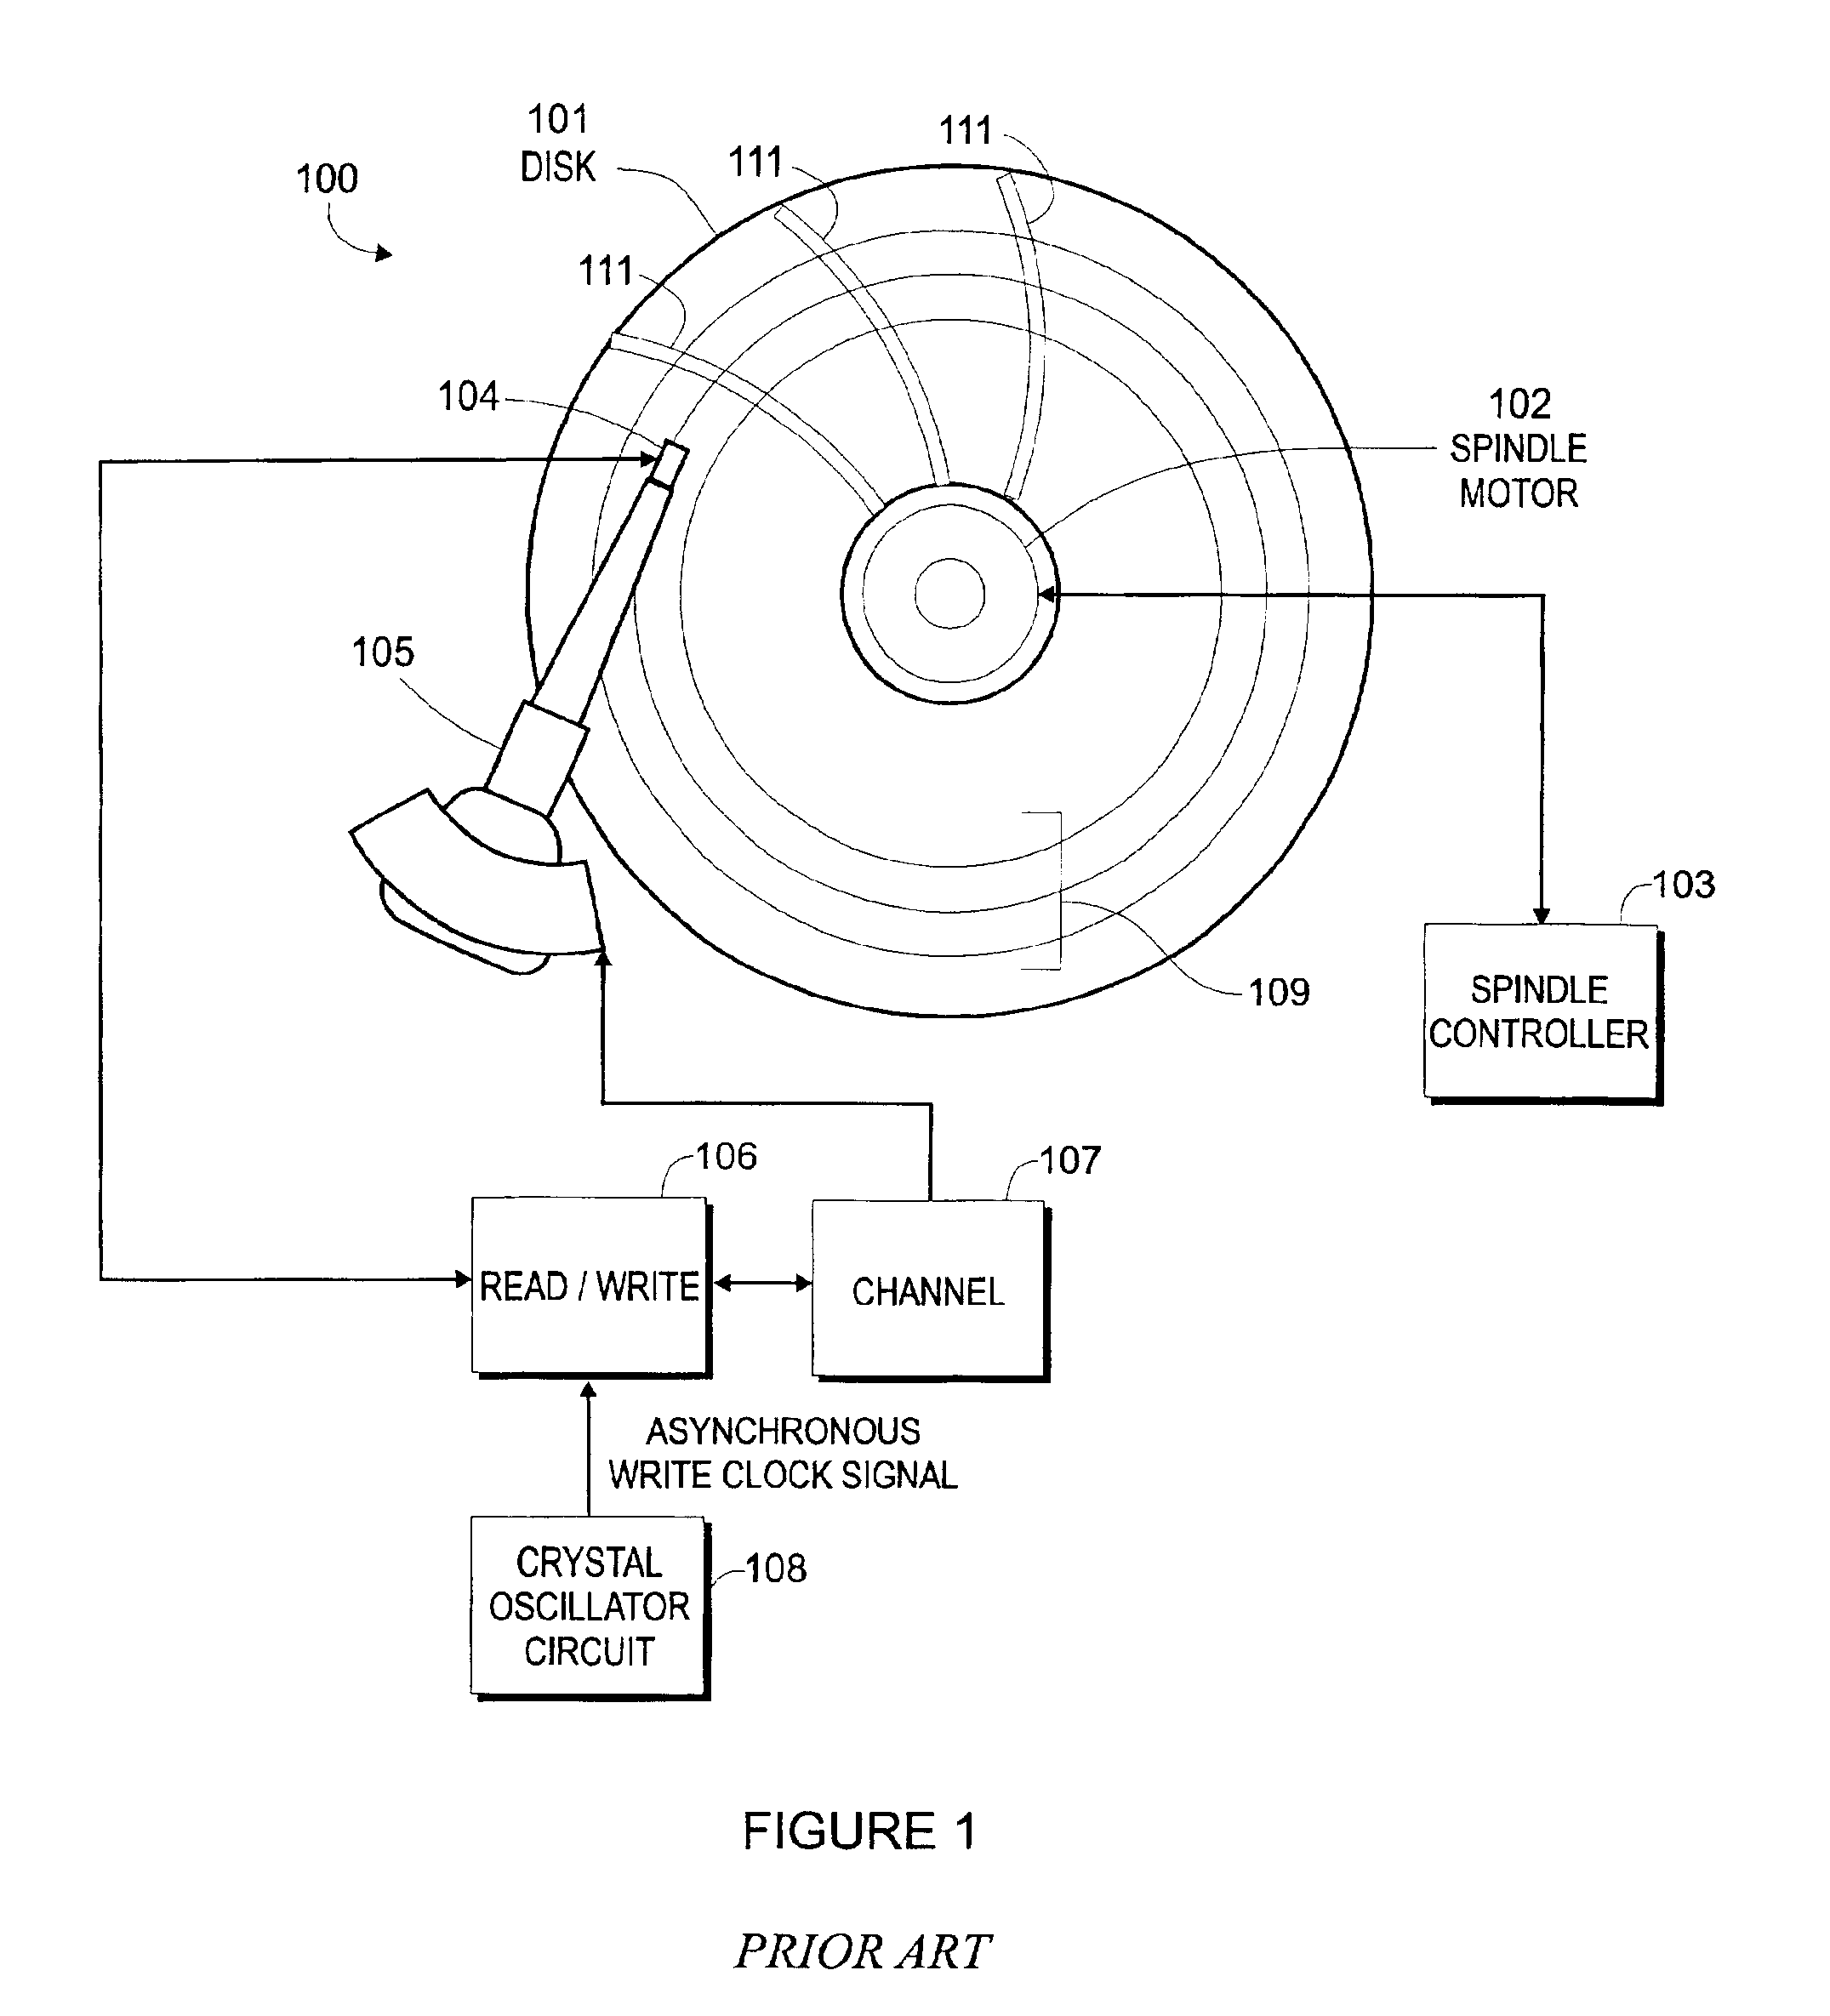 Disk drive with servo synchronous recording